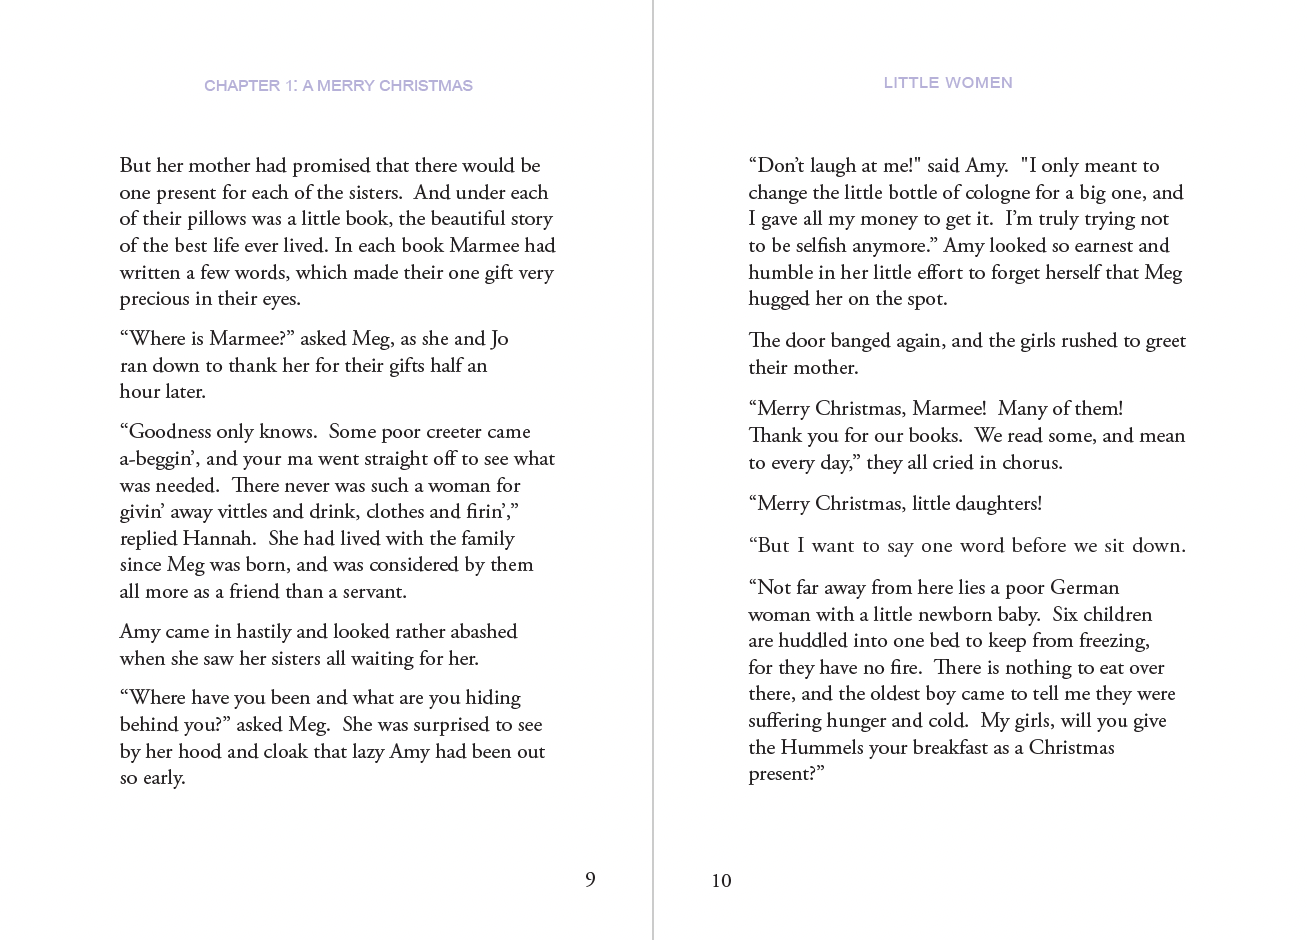 A book spread. Pg 9 and 10 text from Little Women.